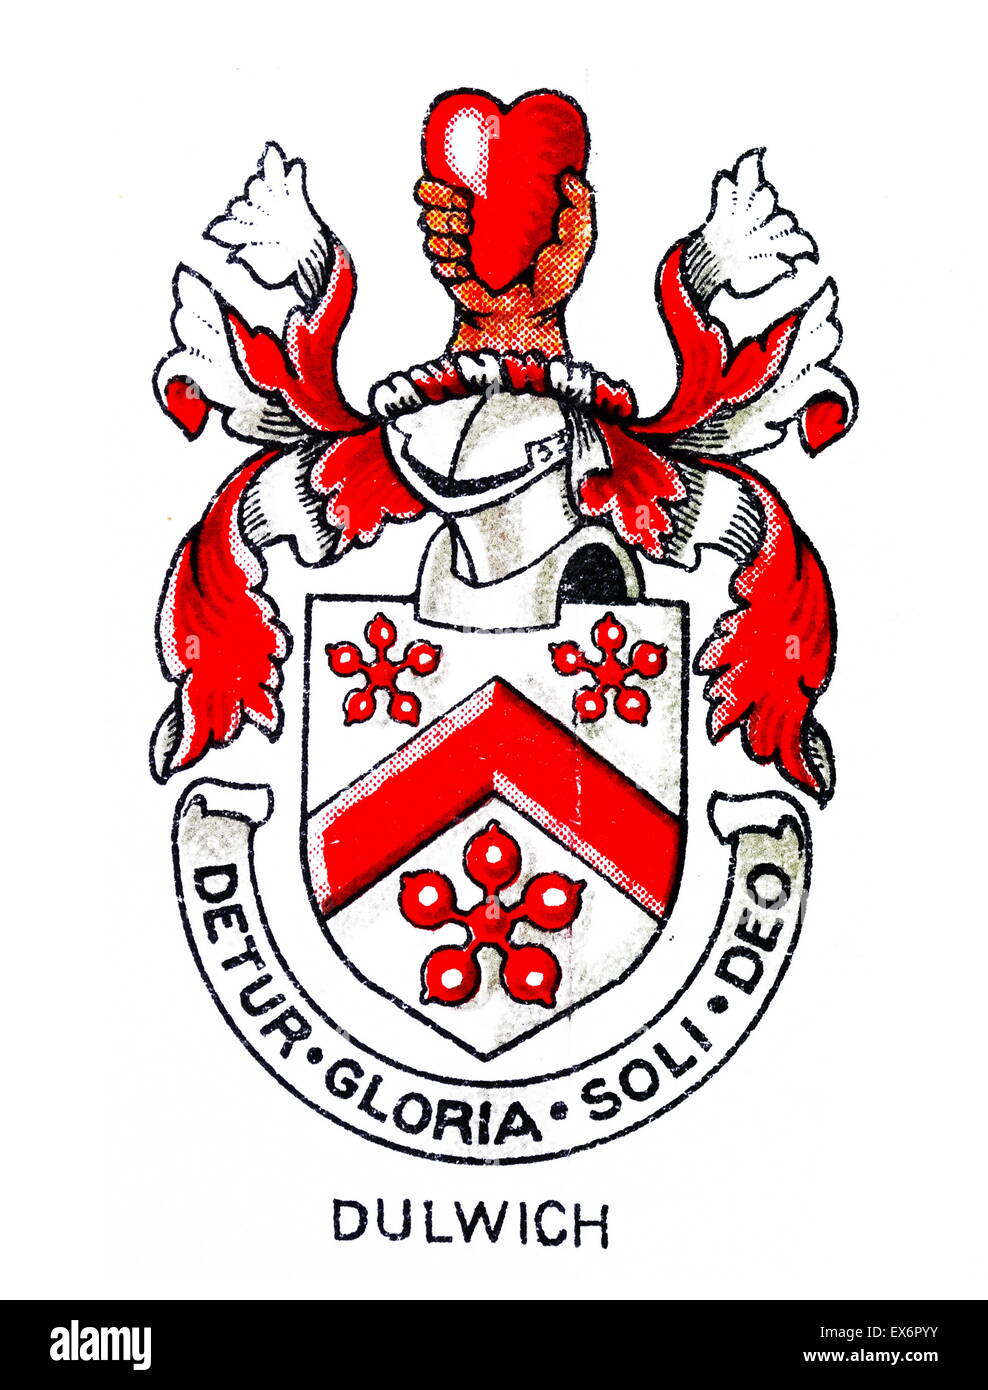 Emblem for Dulwich College, Southeast London, an independent public school for boys. The college was founded in 1619 by Edward Alleyn, a successful Elizabethan actor. Stock Photo